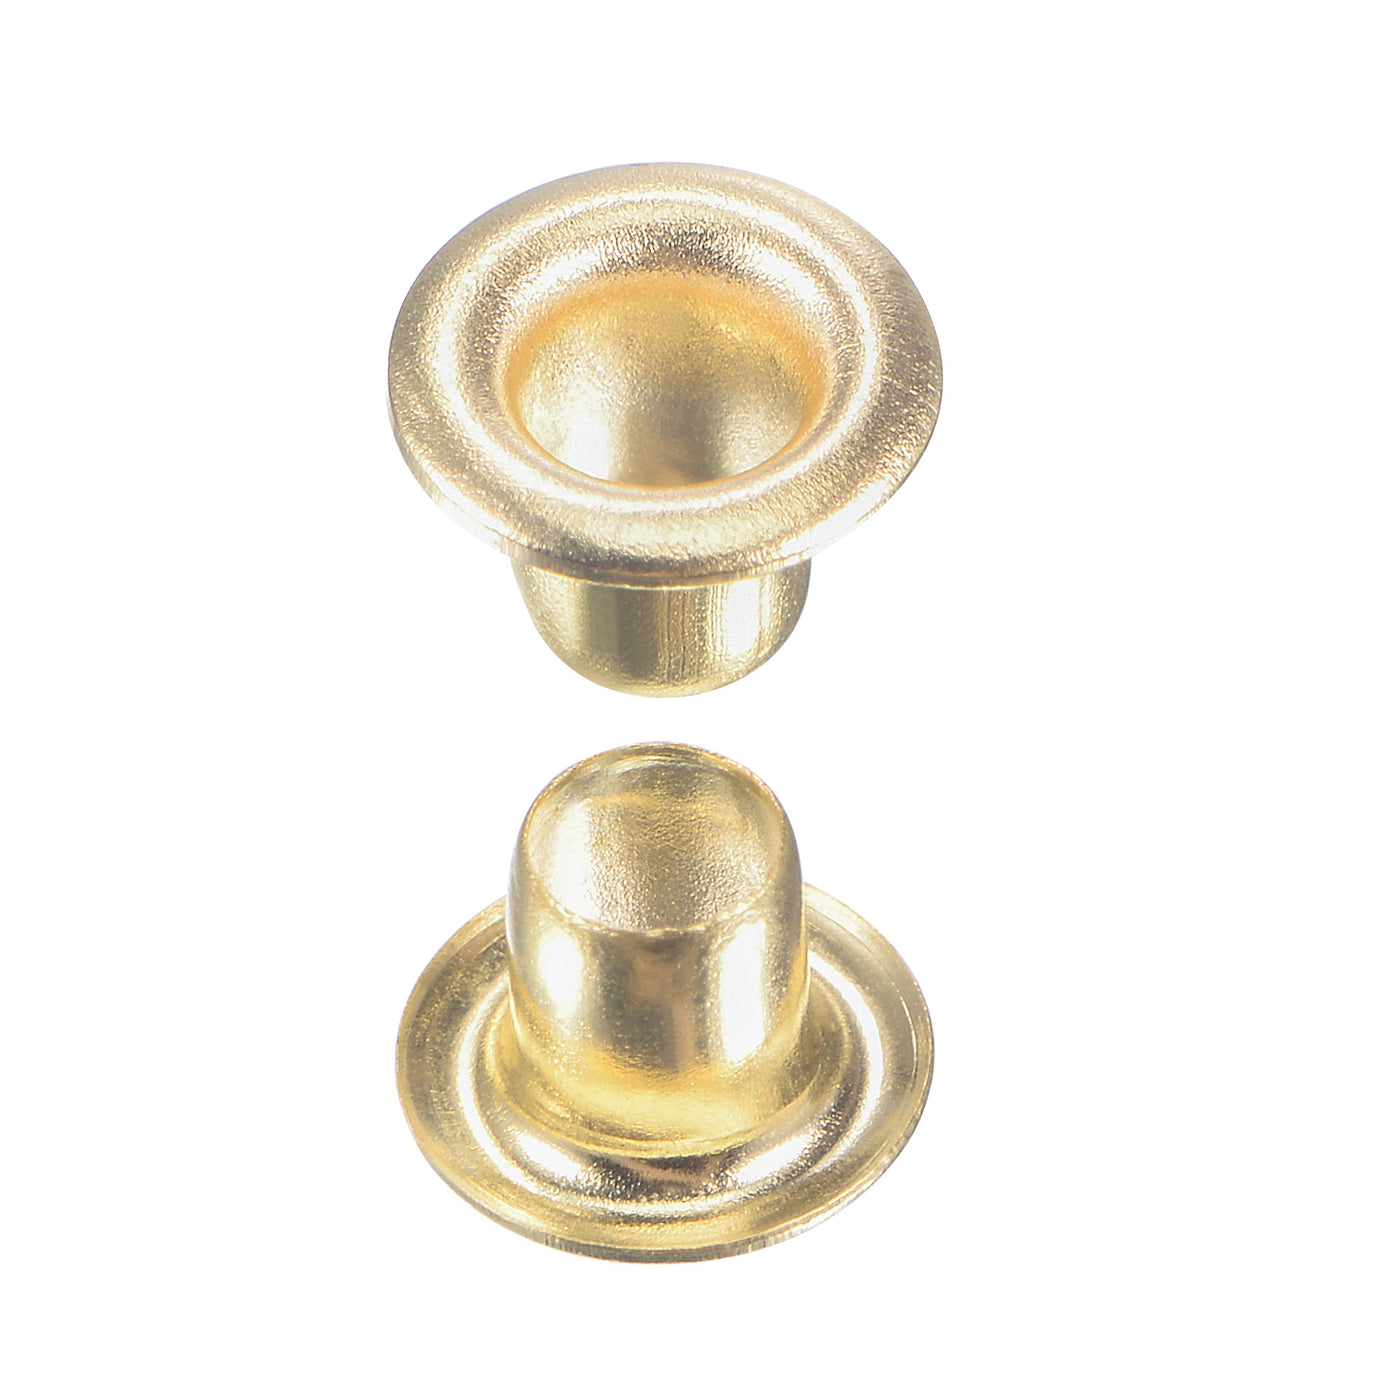 uxcell Uxcell Eyelet with Washer 6x3x4mm Copper Grommet Chrome Plated Gold Tone 100 Set